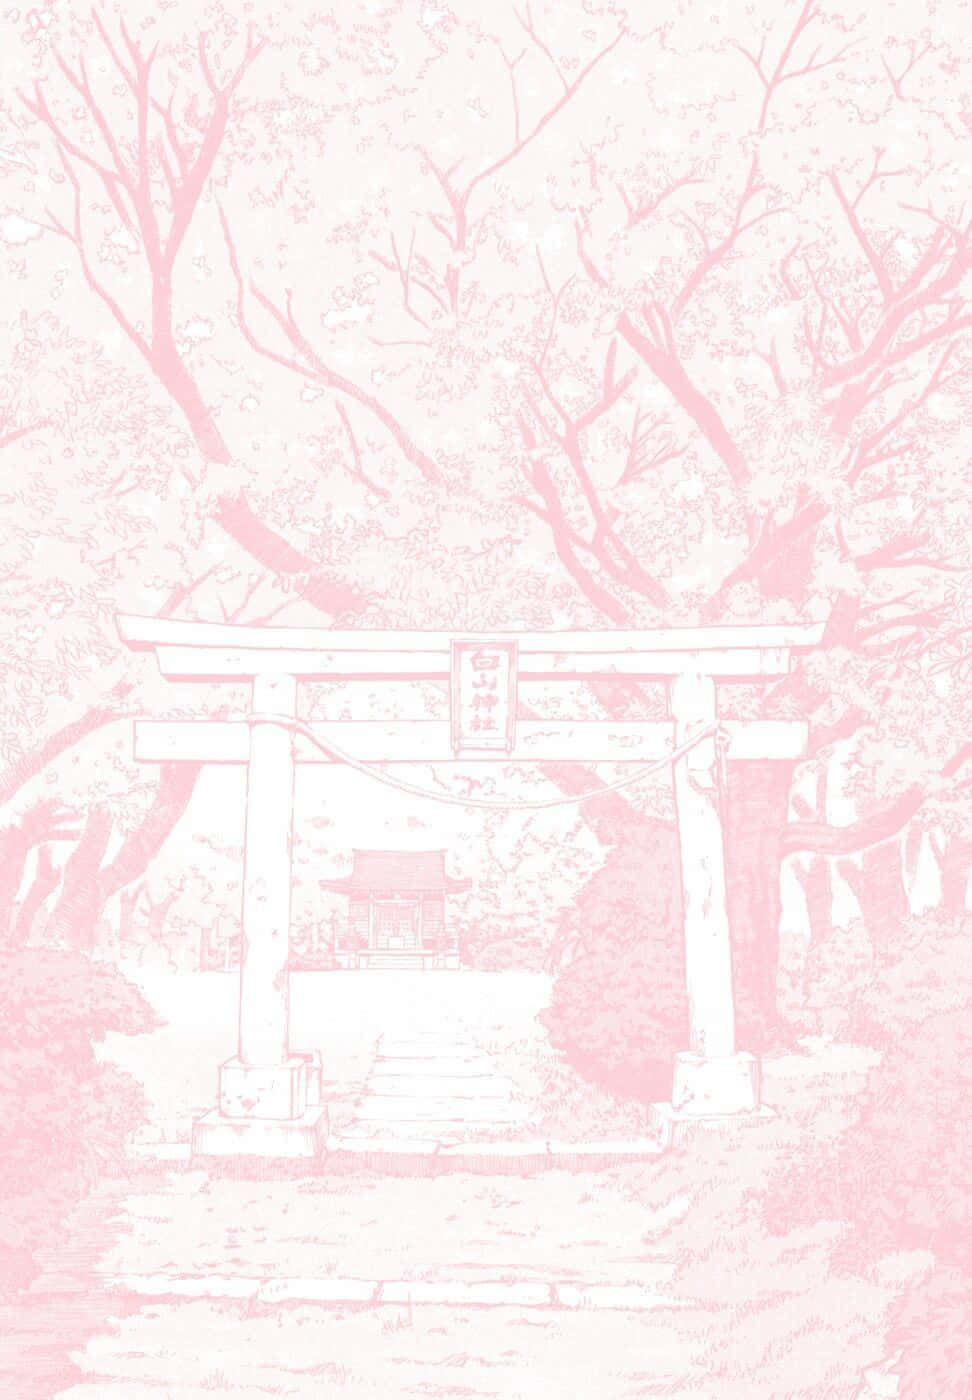 Dreamy Pastel Pink Aesthetic Anime Wallpaper